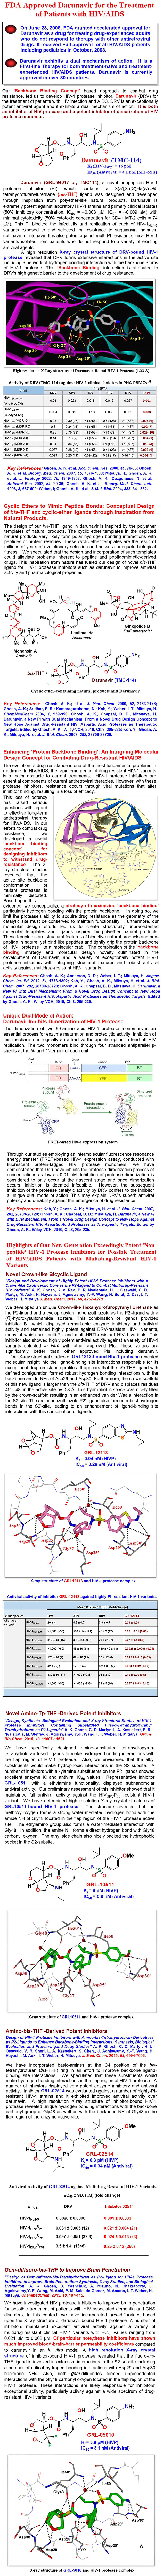 HIV Research - Ghosh Group - Updated 2017